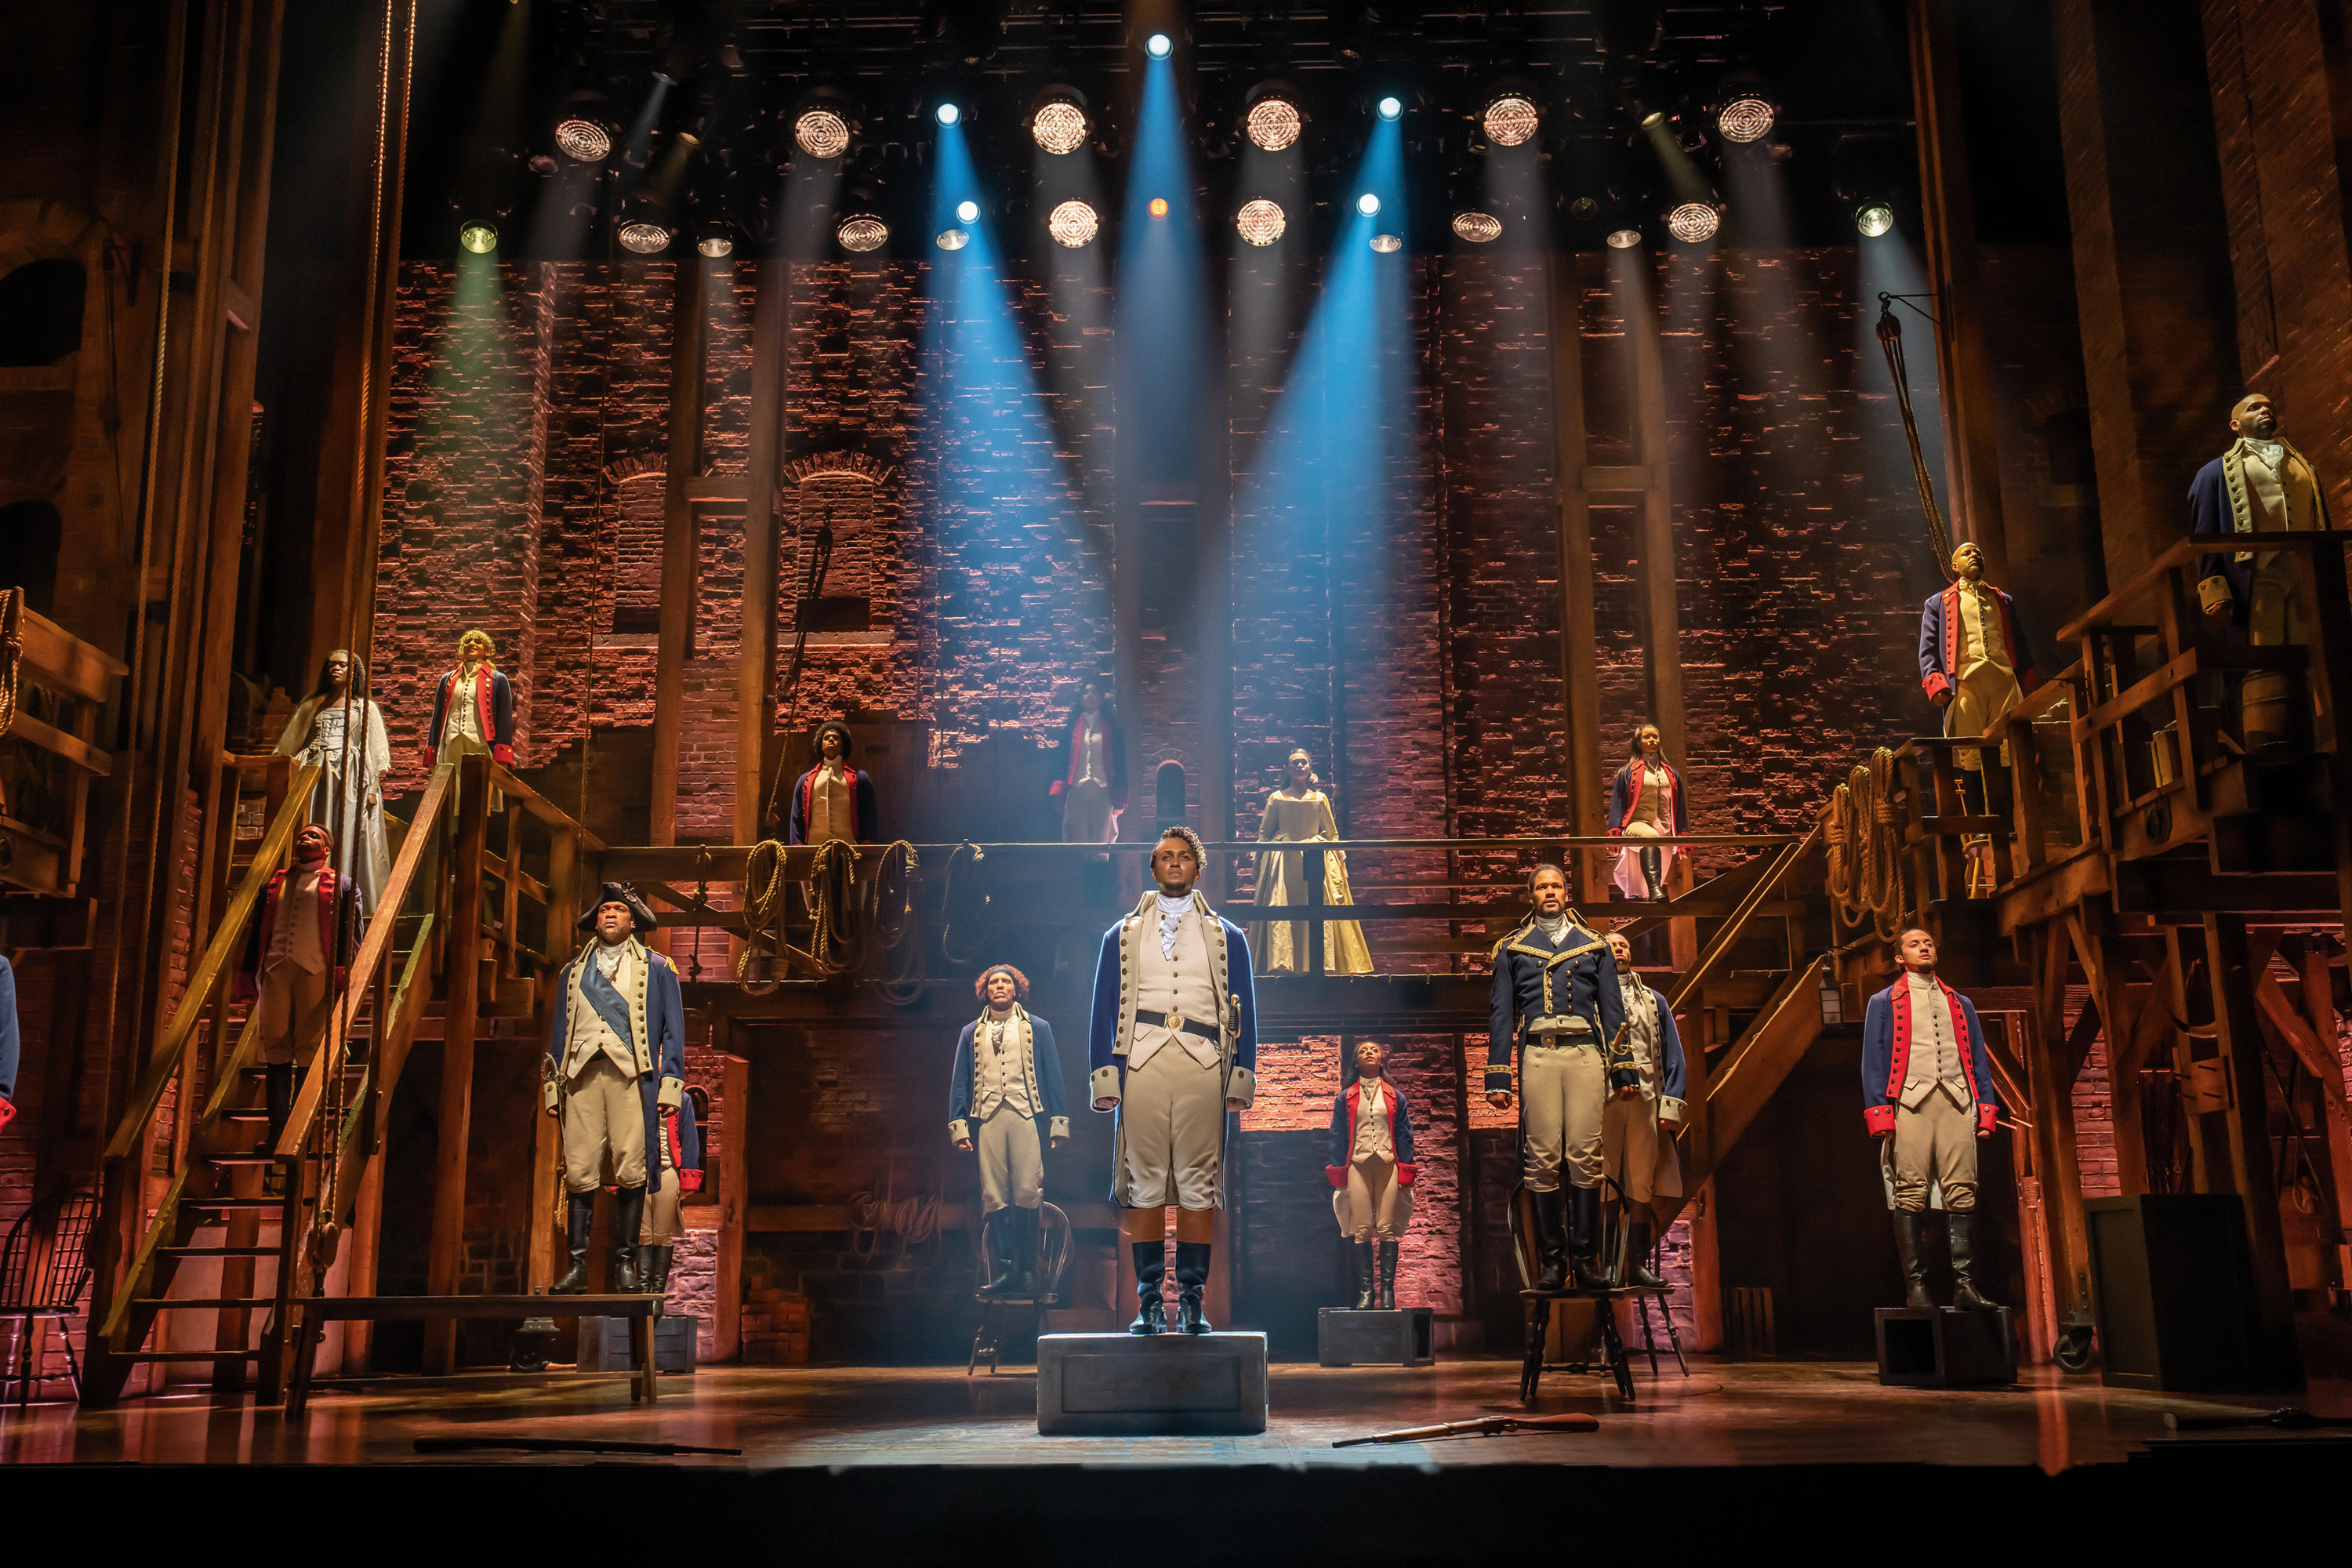 Hamilton musical Review: An iconic tale told through 3 hours of R&B melodies and power-packed rap